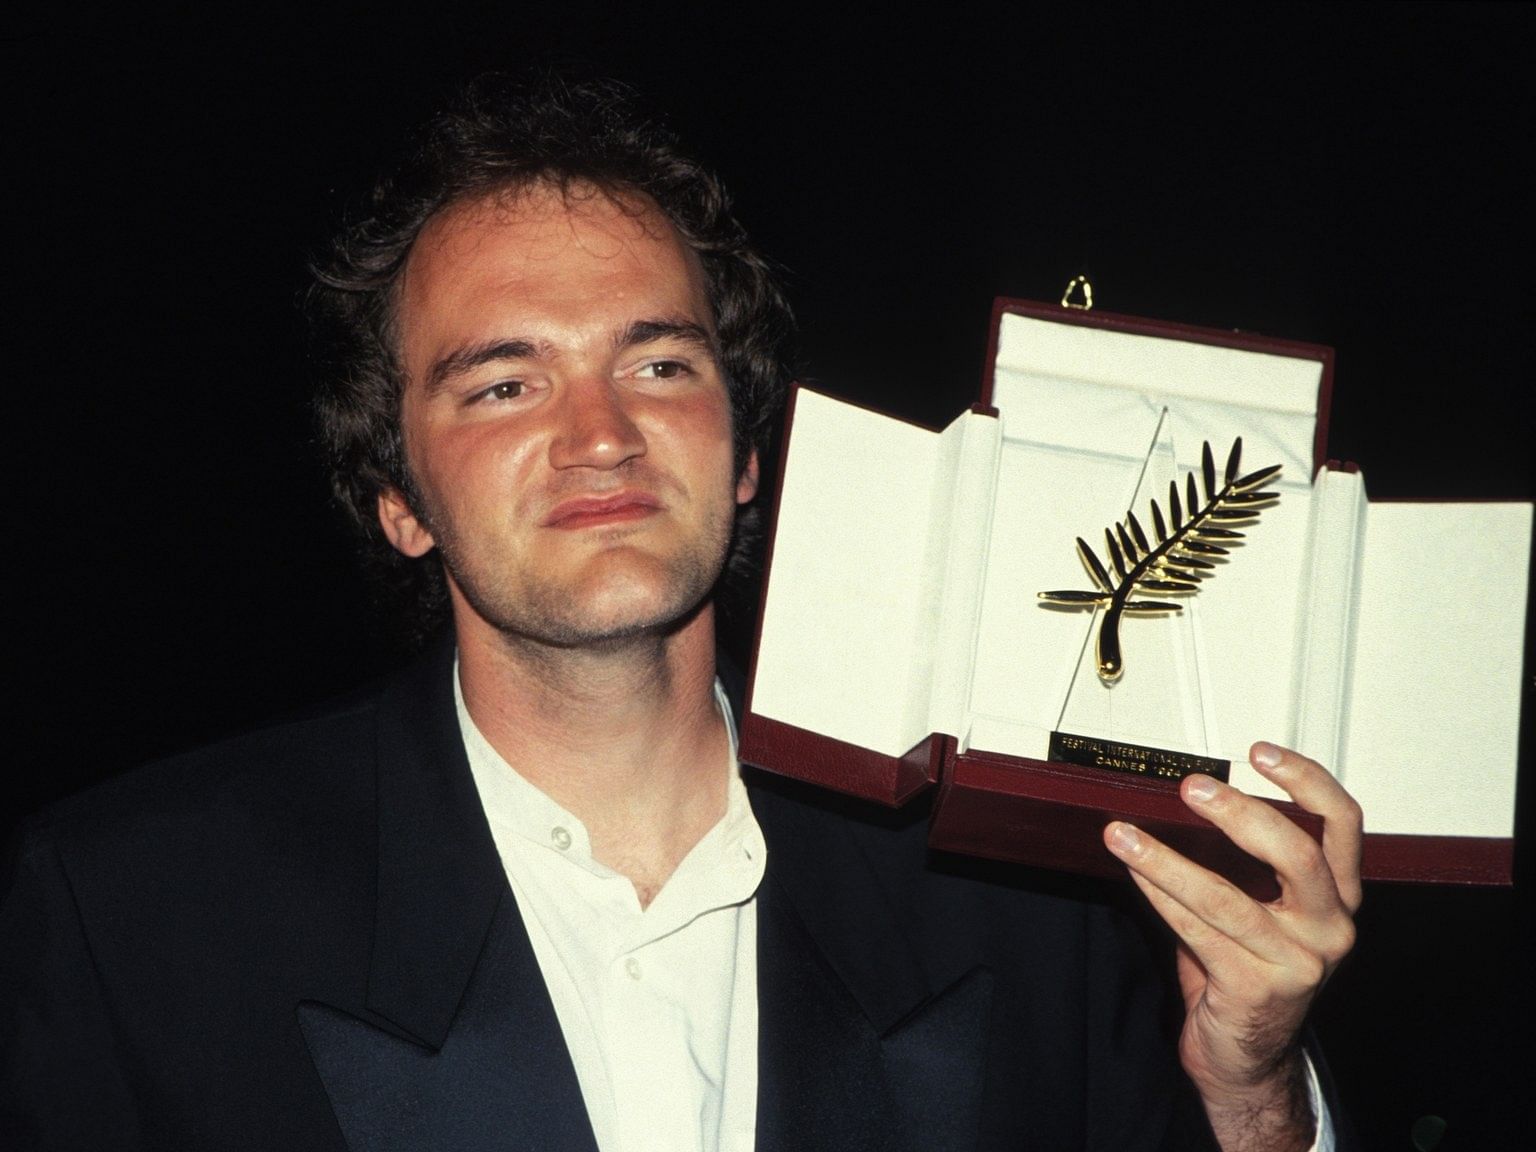 Quentin Tarantino with the Palme d'Or that he won for 'Pulp Fiction' in 1994.